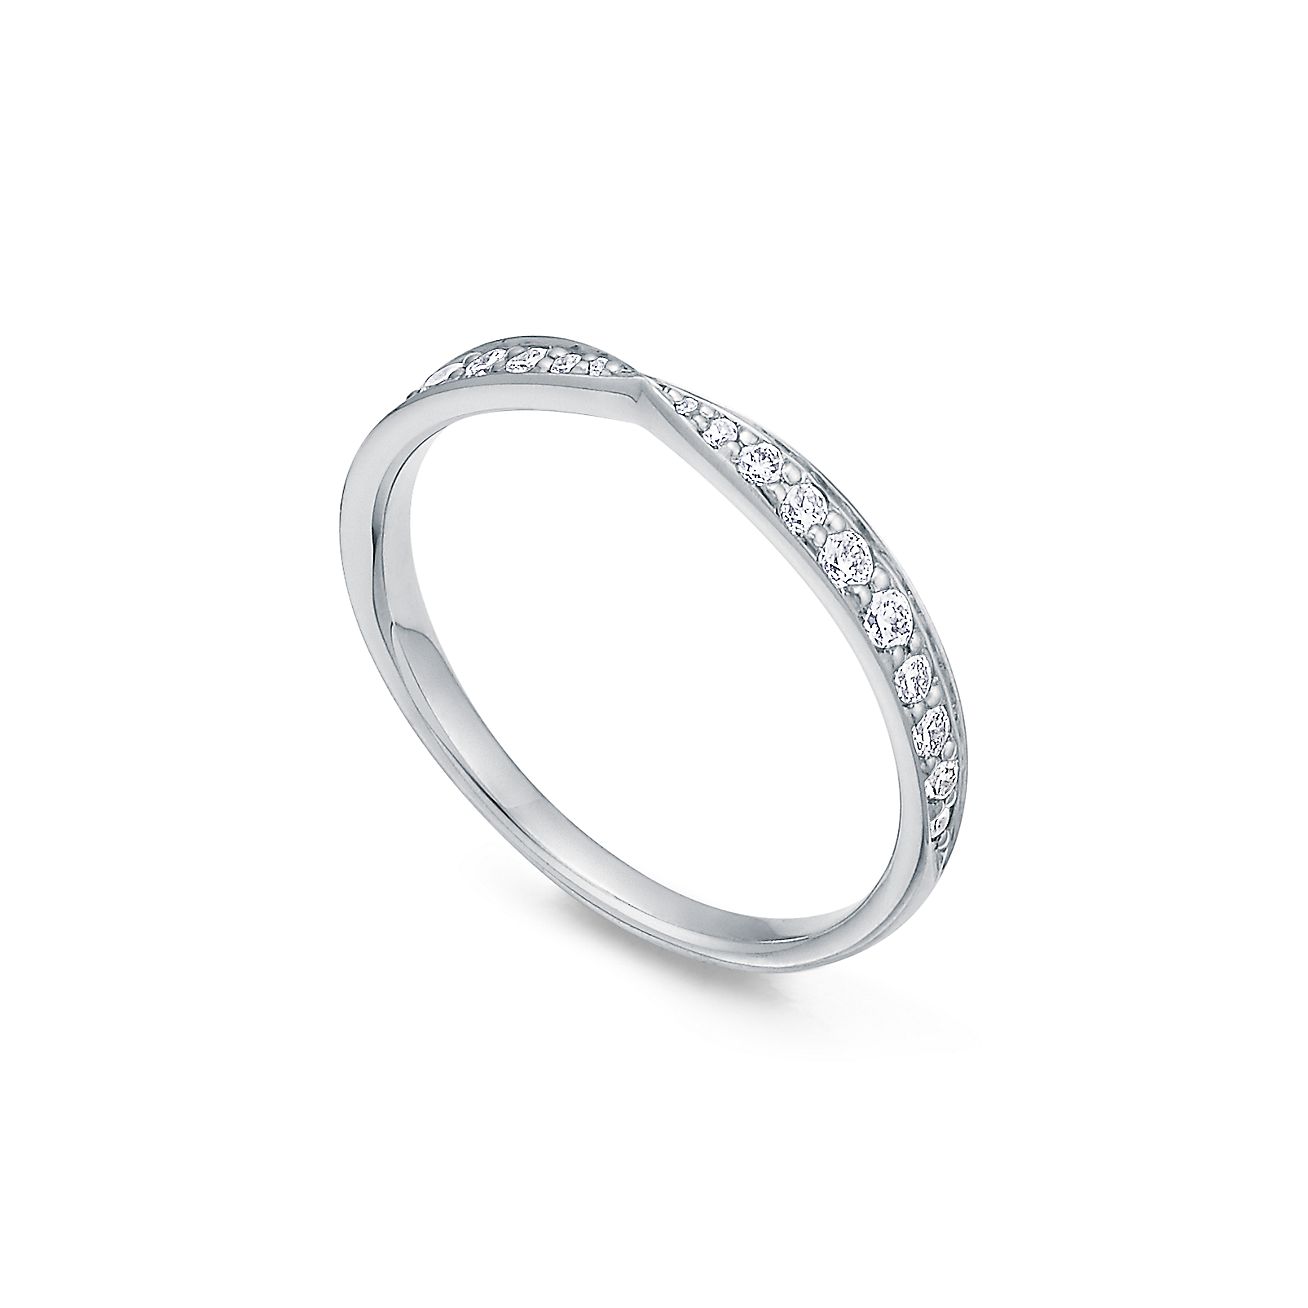 Tiffany Harmony® ring in platinum with 